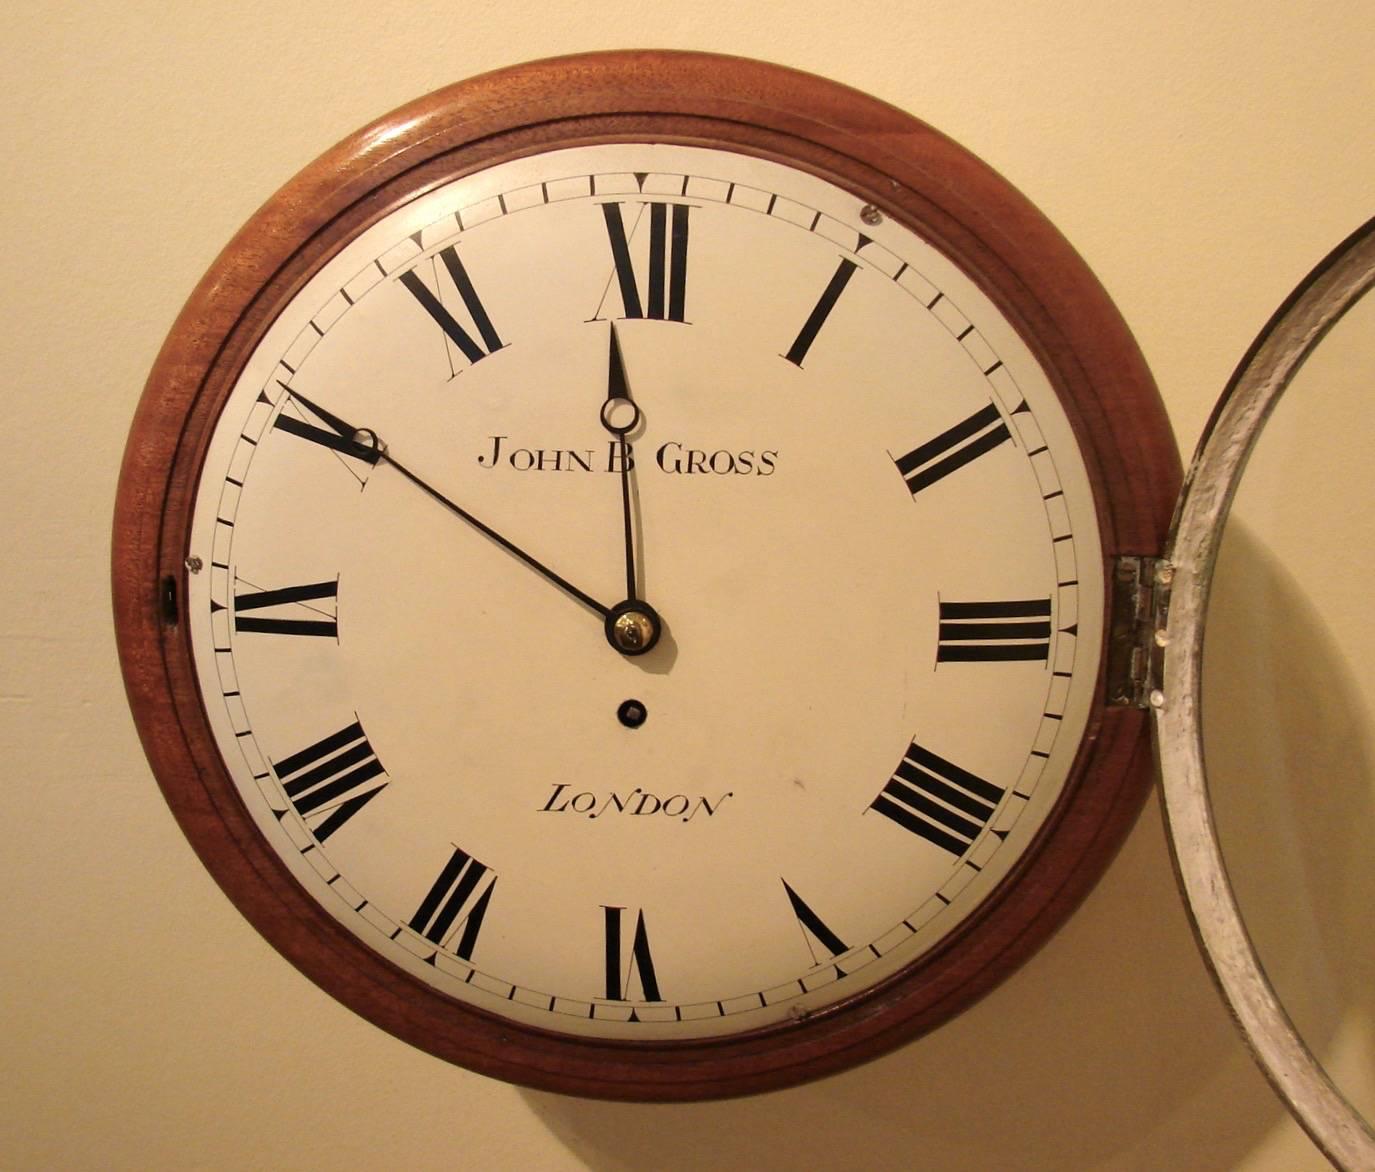 An English mahogany and oak wall clock made and signed by John B. Gross, the fusee movement in working order, the 12 inch diameter dial with painted roman numerals, circa 1850.